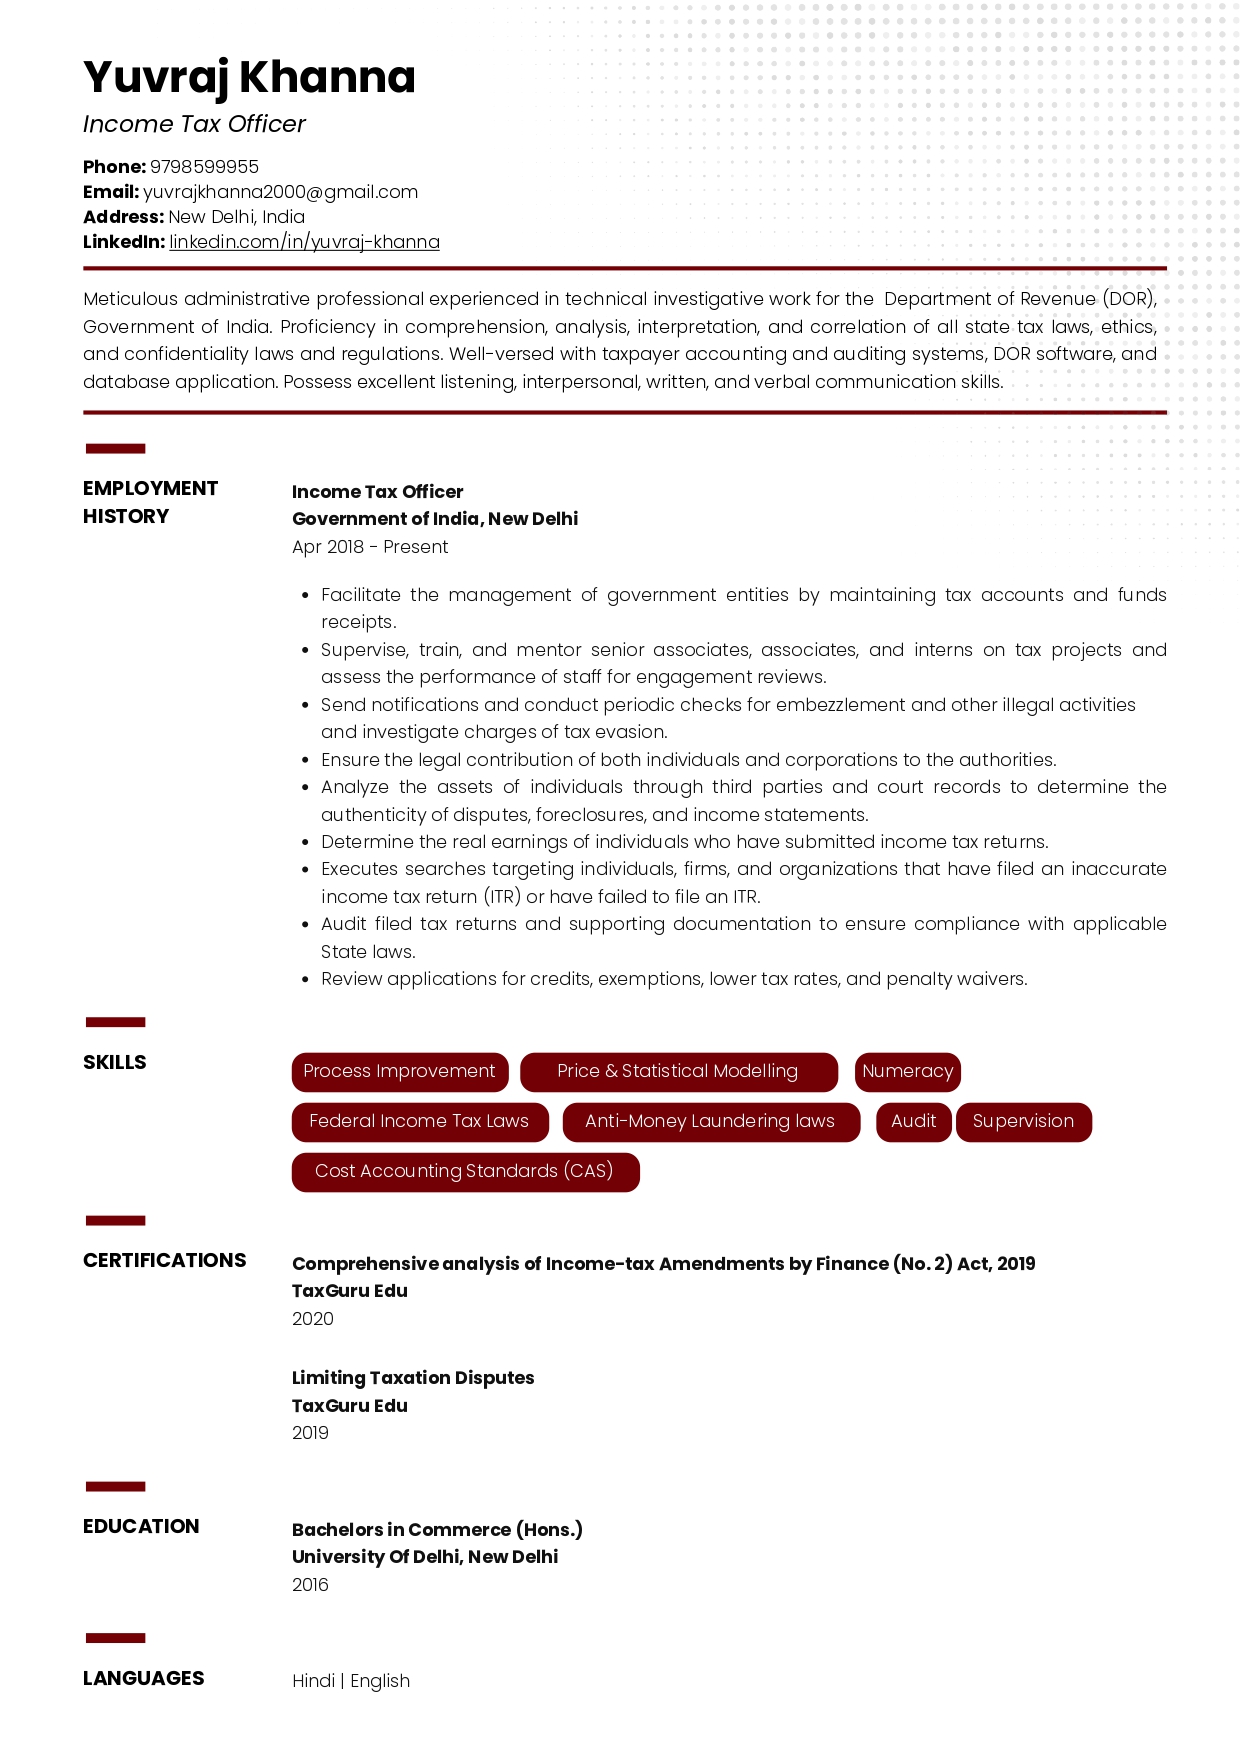 Sample Resume of Income Tax Officer | Free Resume Templates & Samples on Resumod.co